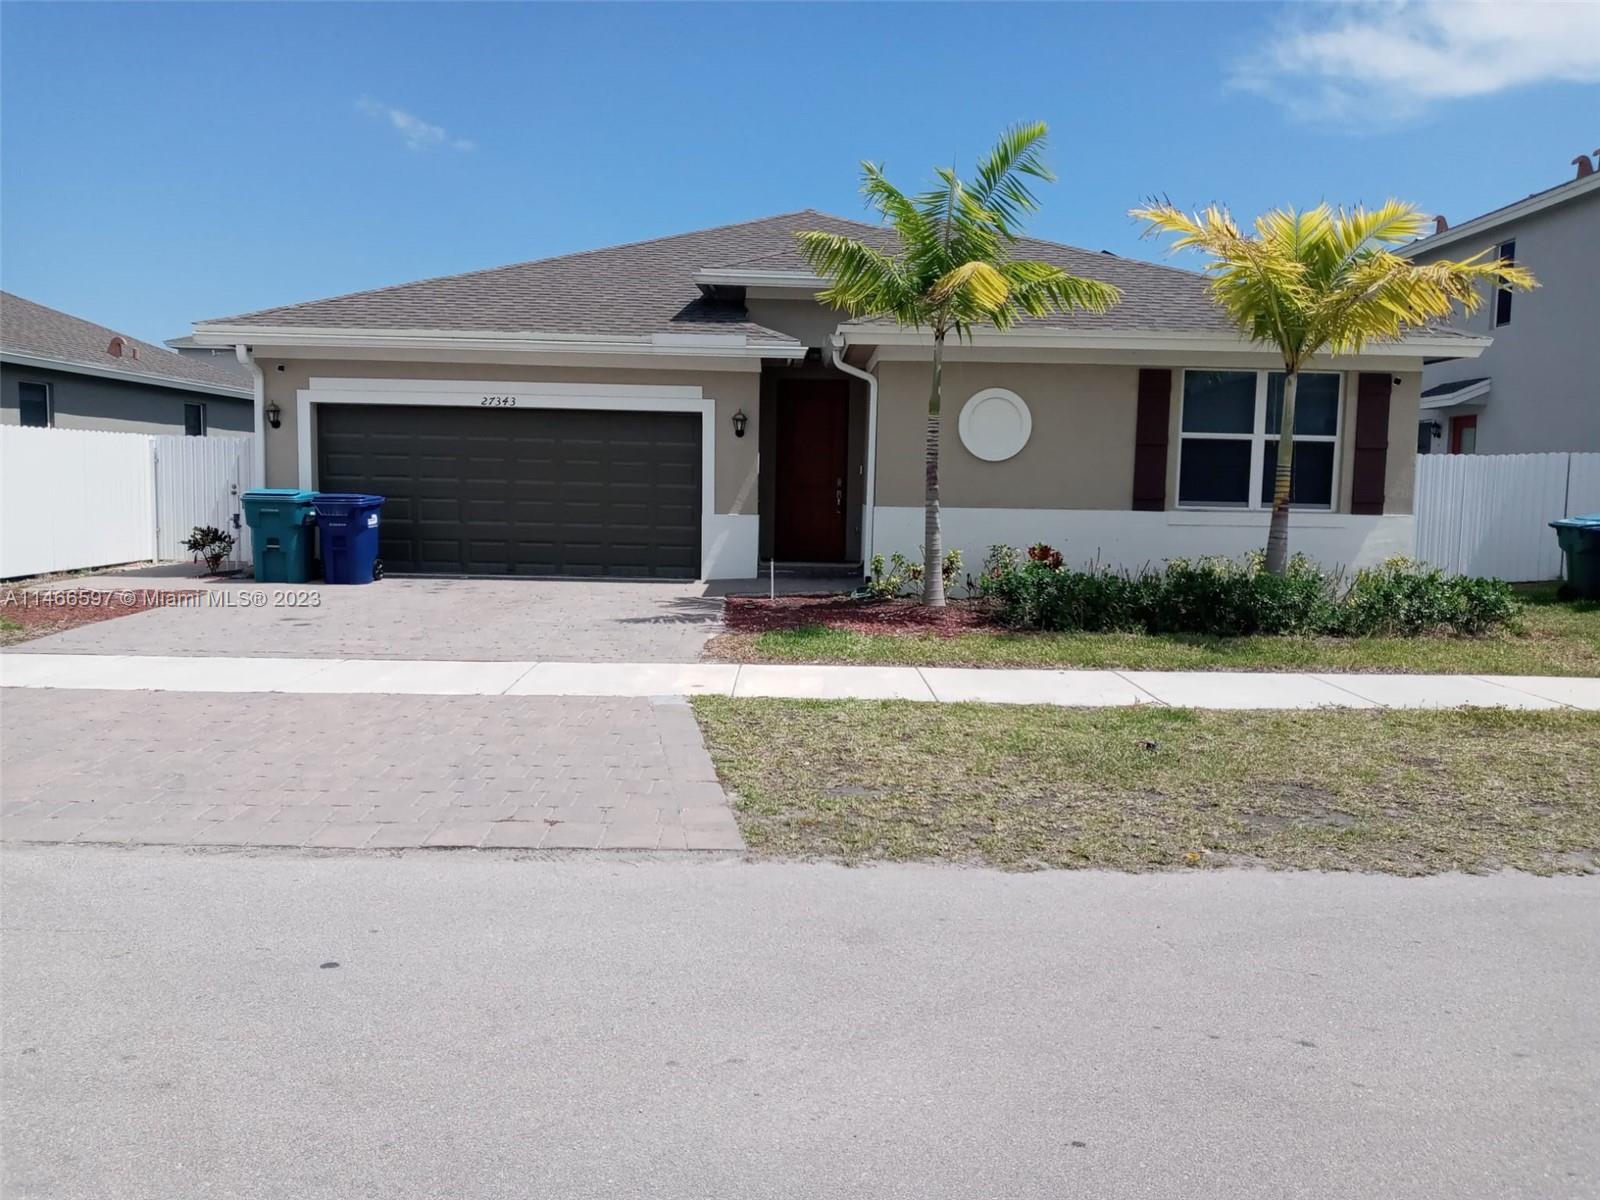 Photo of 27343 SW 132nd Pl in Homestead, FL